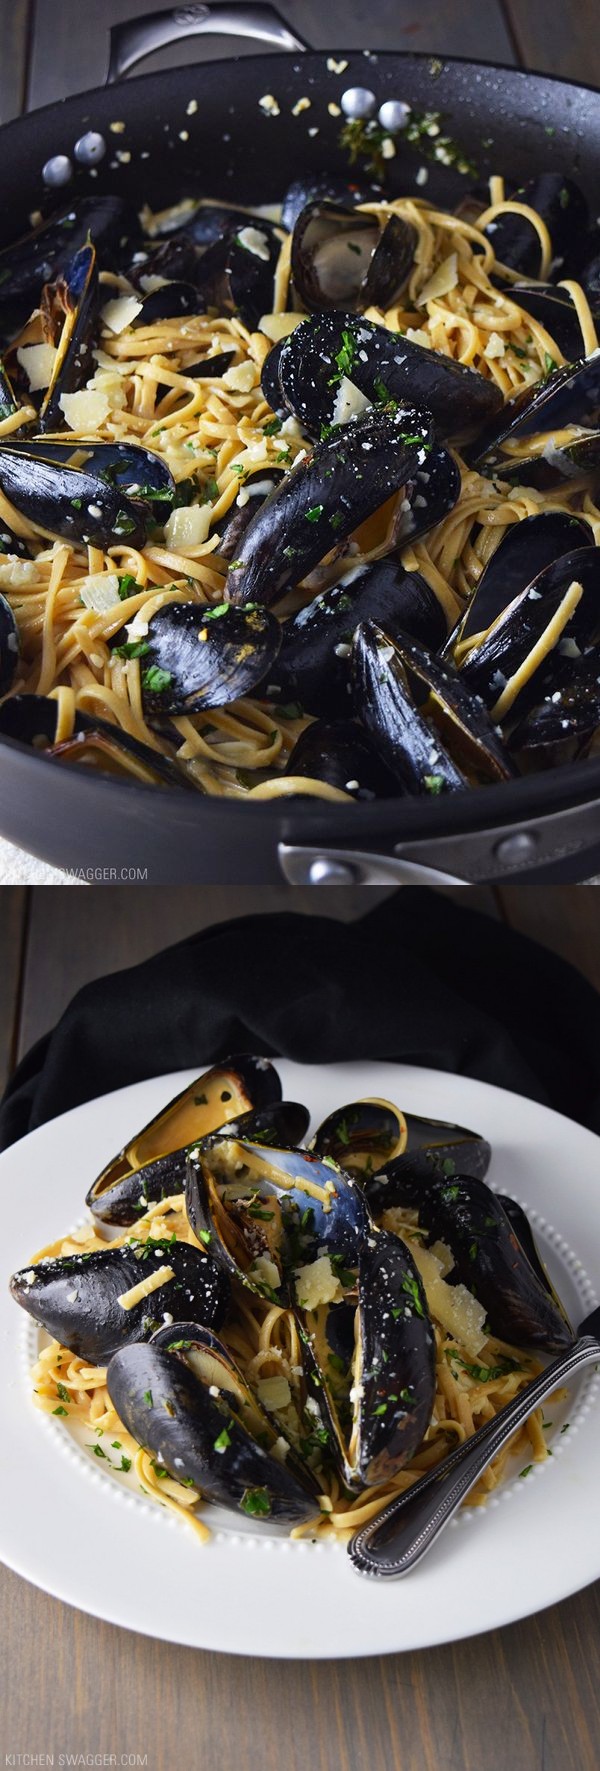 Mussels over Linguine with Garlic Butter Sauce